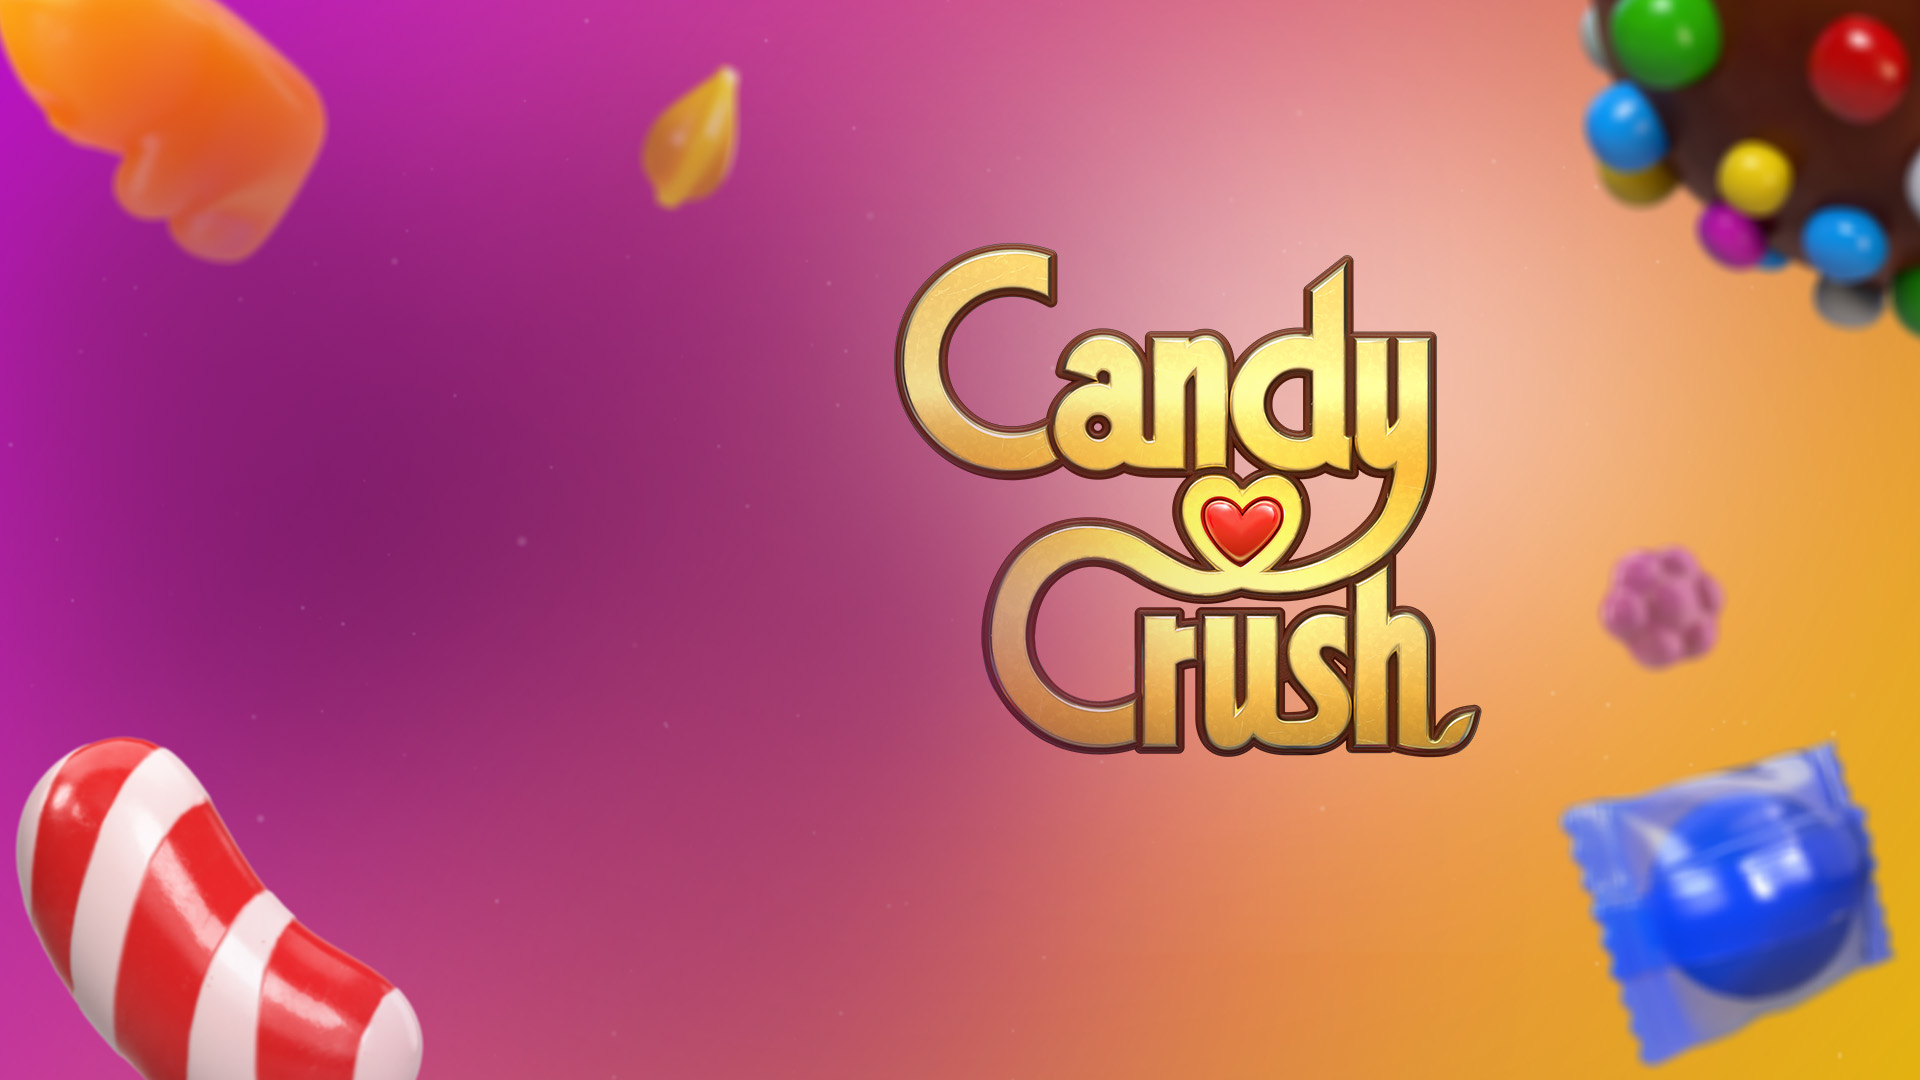 Multiple pieces of candy float around the Candy Crush logo.